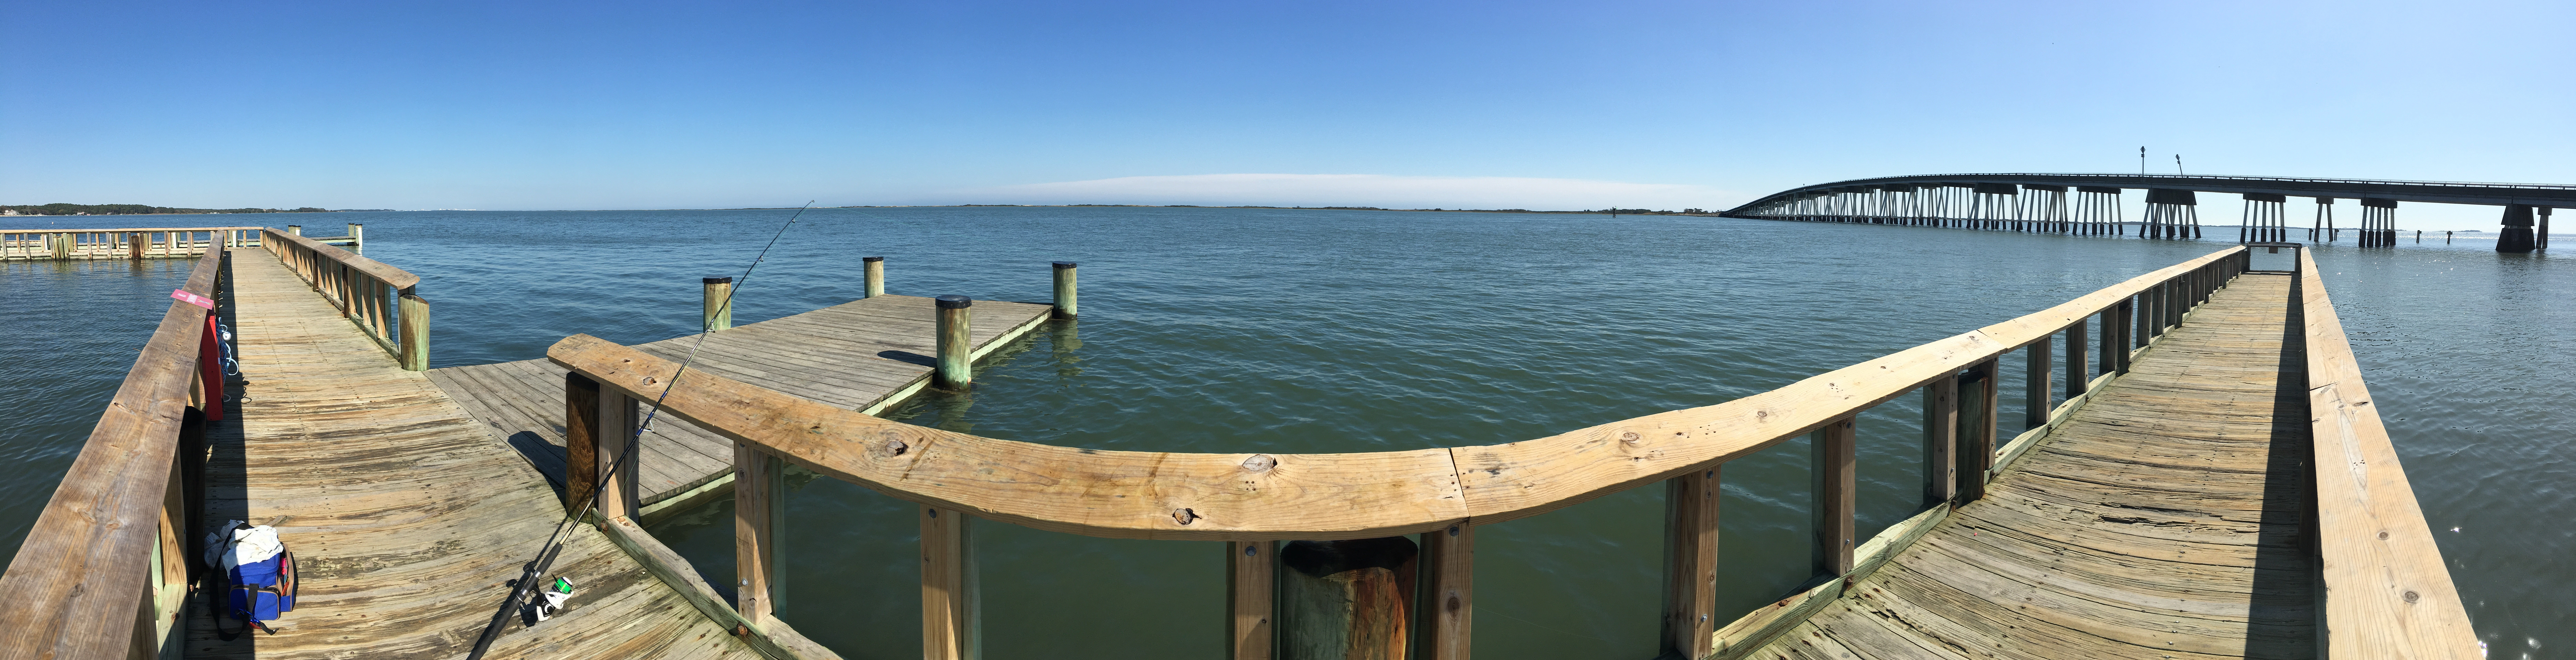 Fishing pier on the Bay